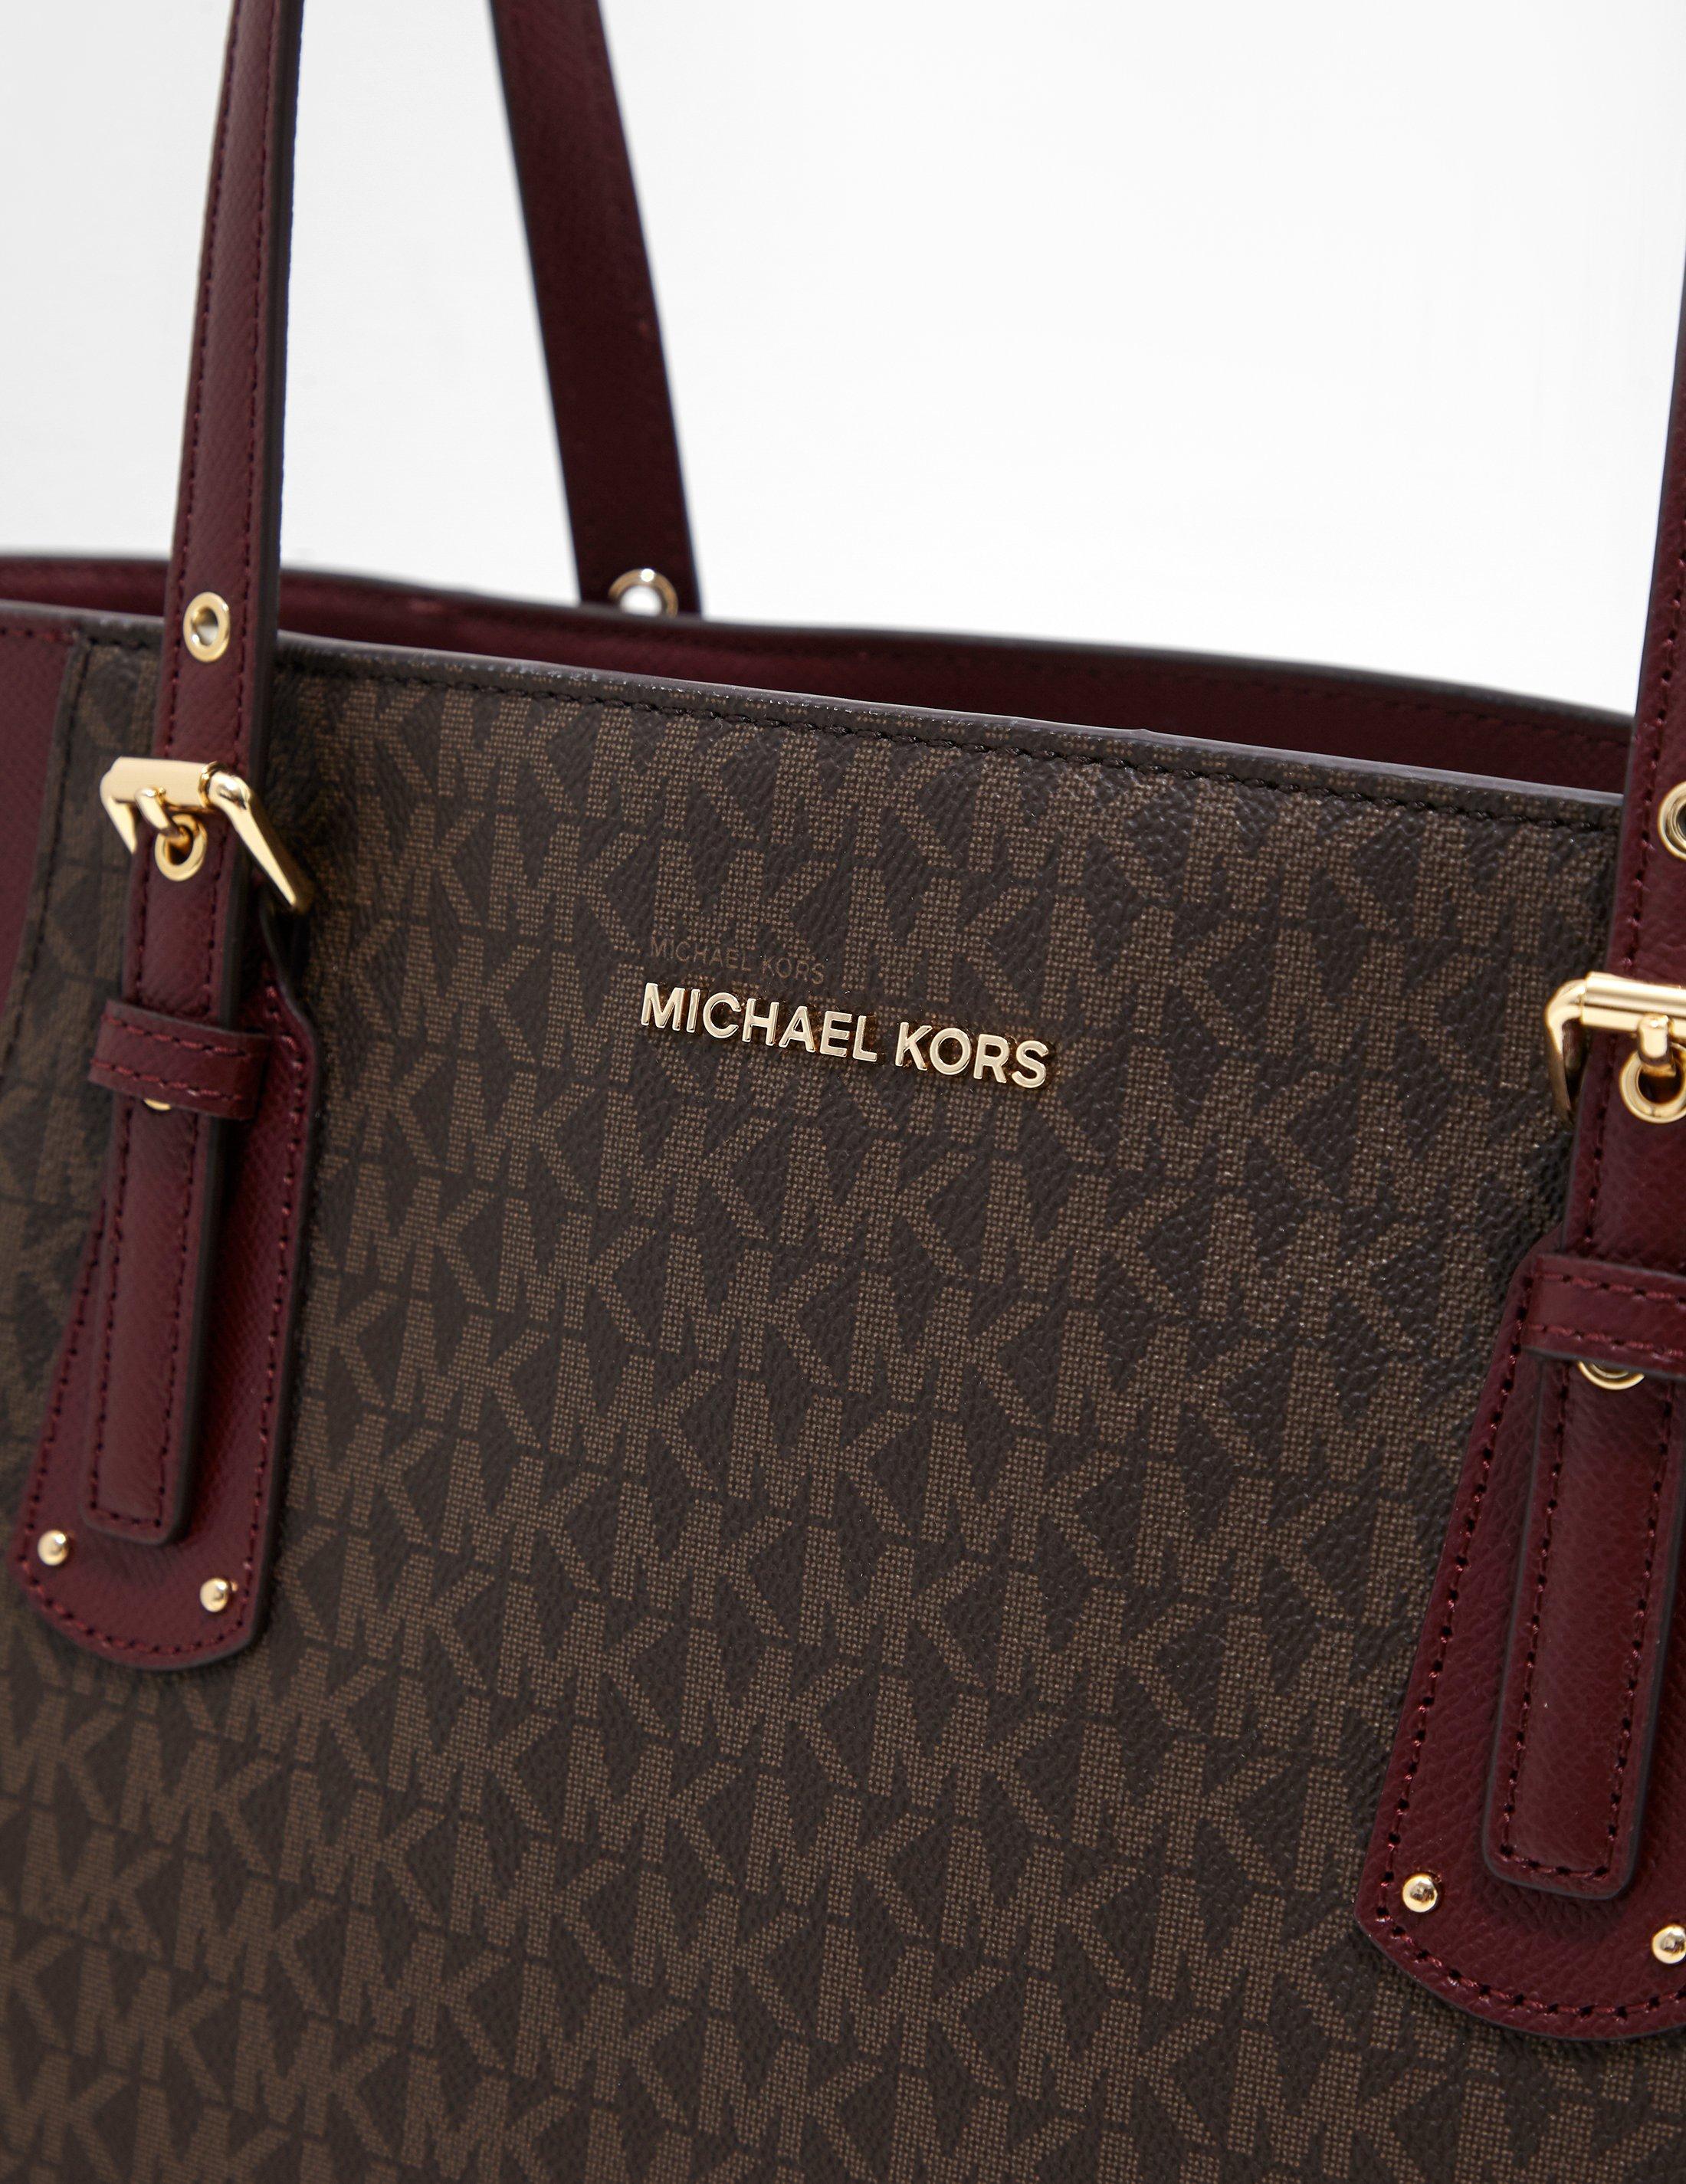 Details more than 70 kors michael bags best - in.cdgdbentre